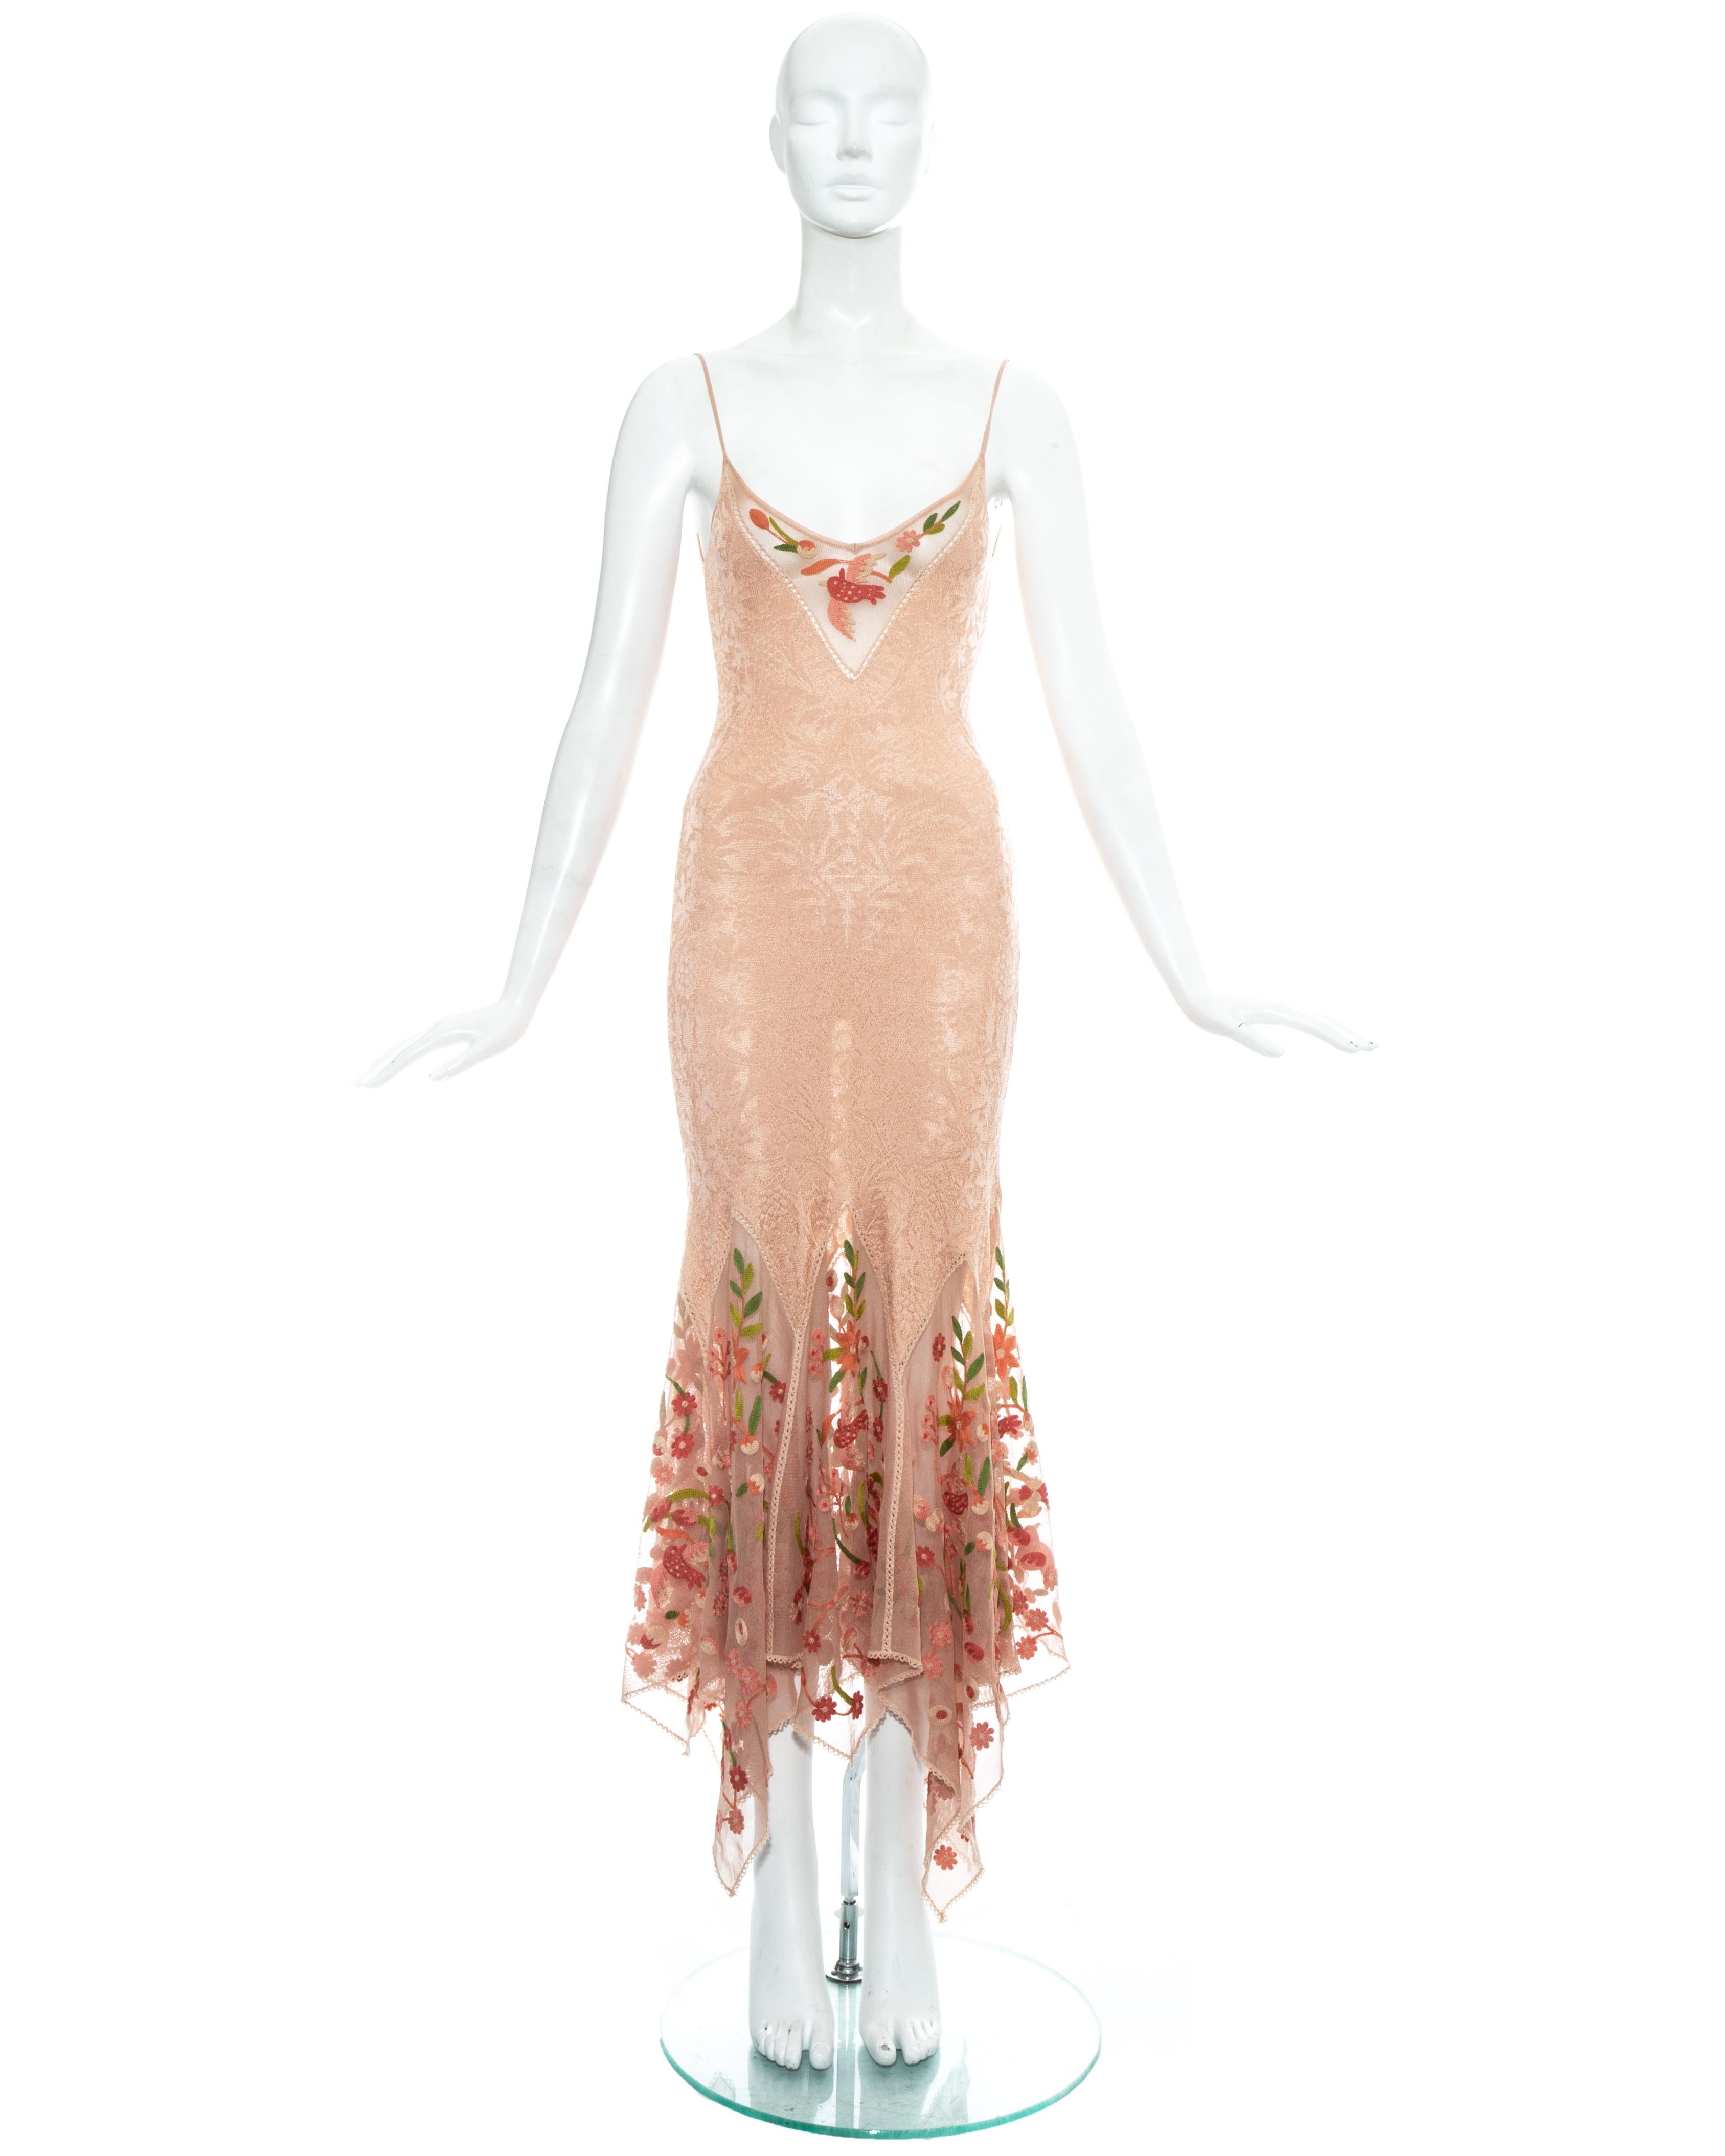 Christian Dior by John Galliano, peach knitted summer dress with floral embroidered mesh inserts and handkerchief hemline skirt.

Spring-Summer 2005